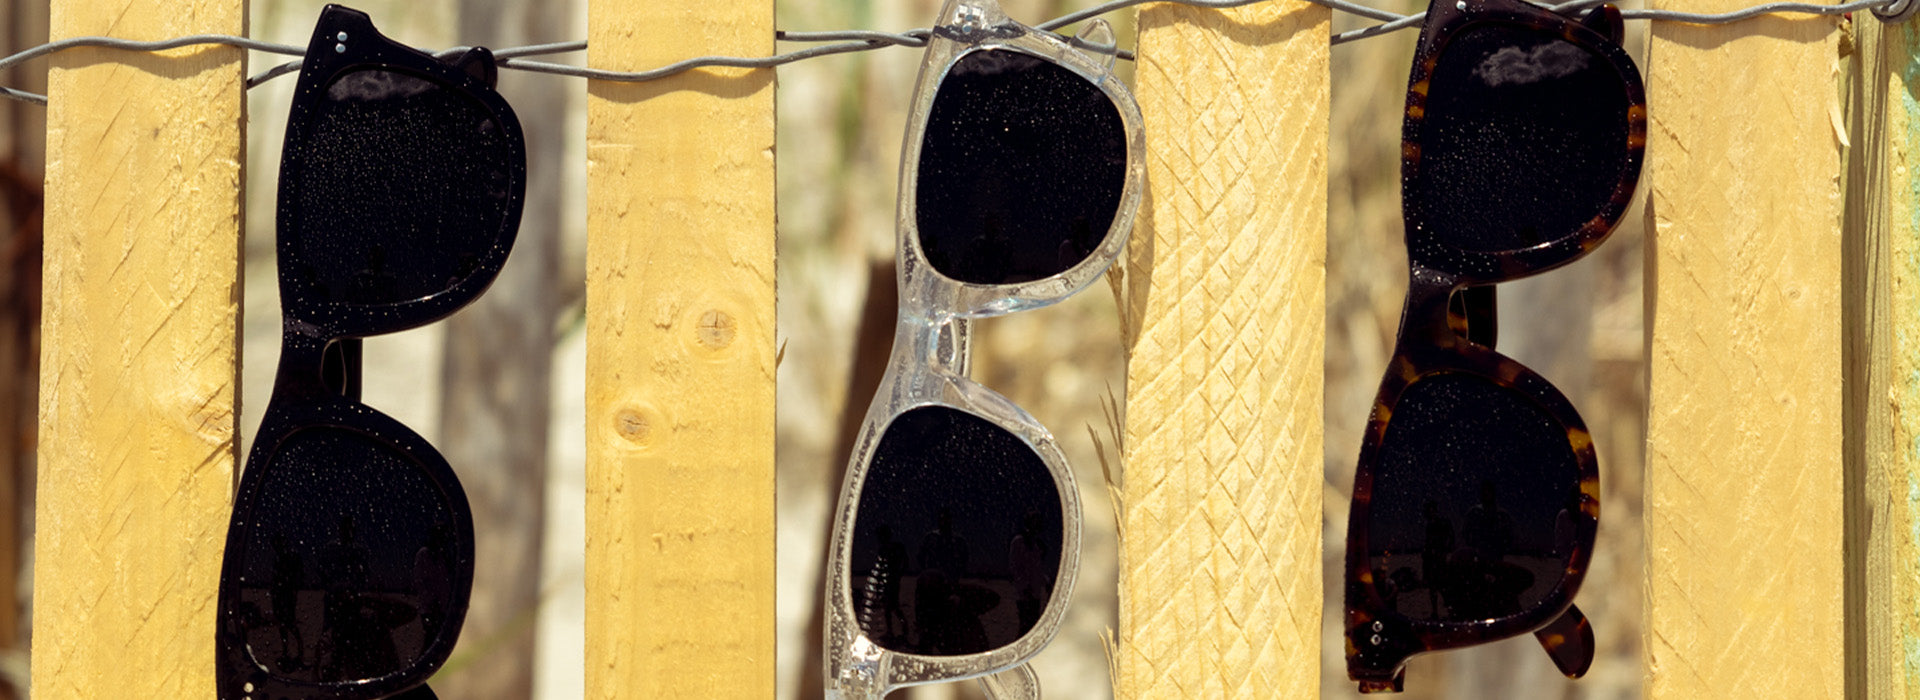 Polarized sunglasses with reflective lenses on a wooden surface, highlighting the glare reduction feature essential for bright outdoor conditions.